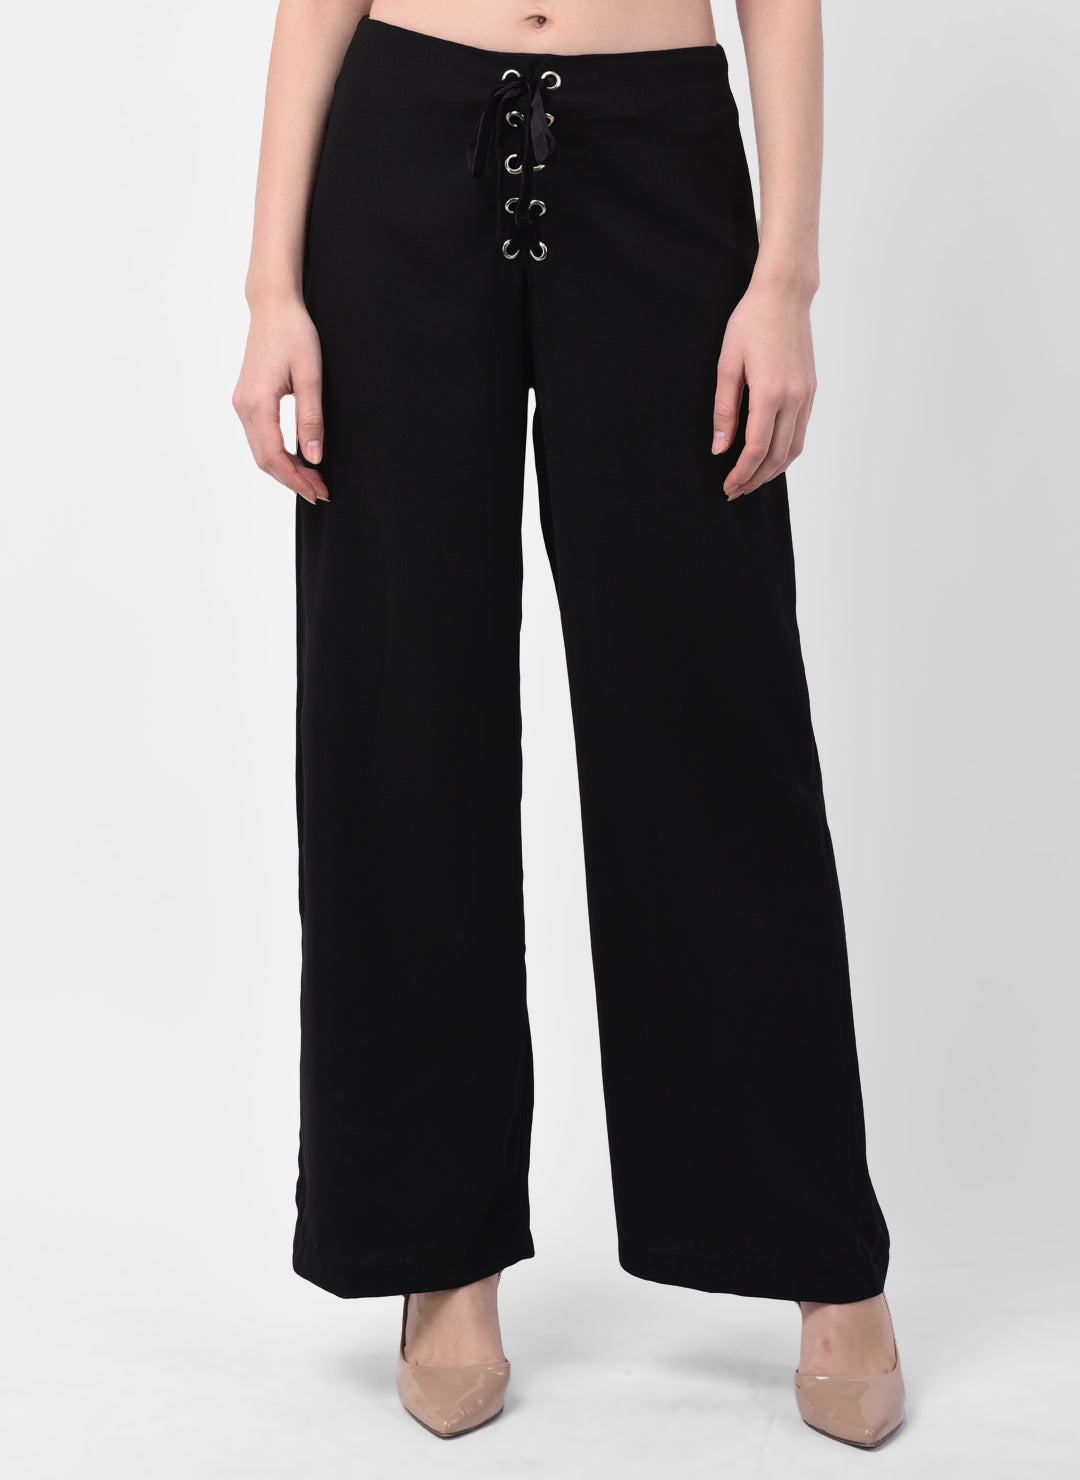 Flare Pants With Cross Pattern Eyelets